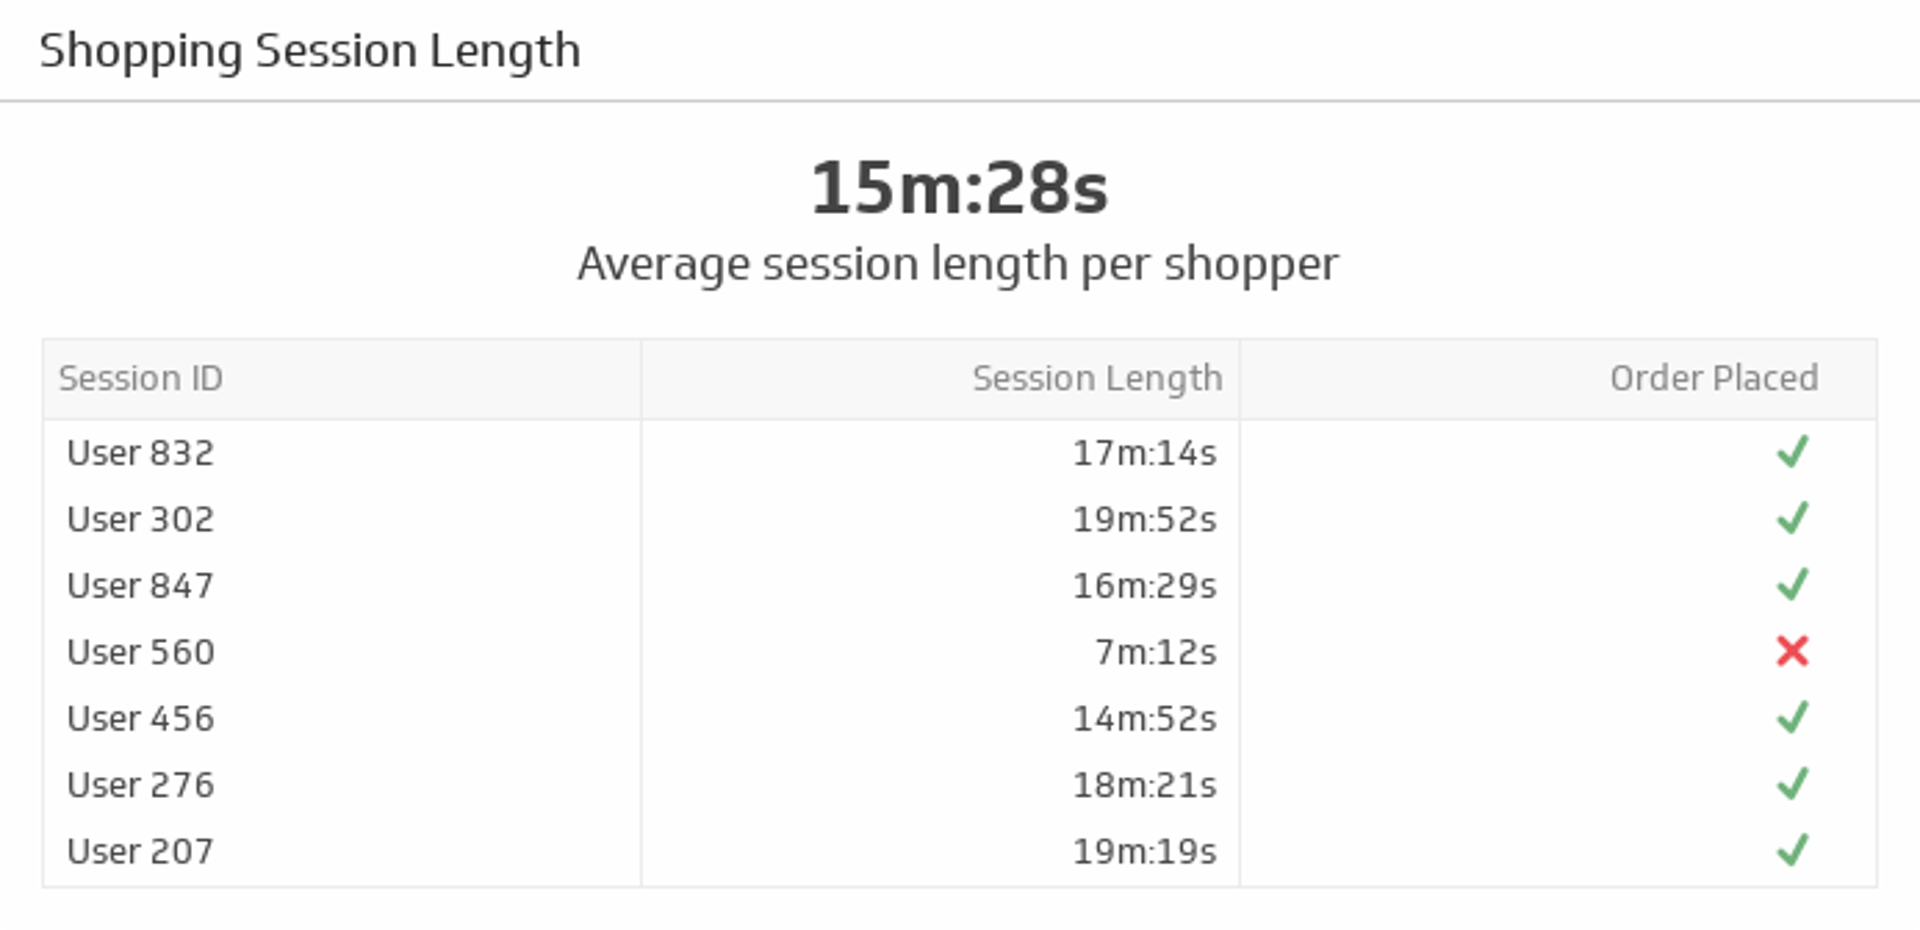 Related KPI Examples - Shopping Session Length Metric